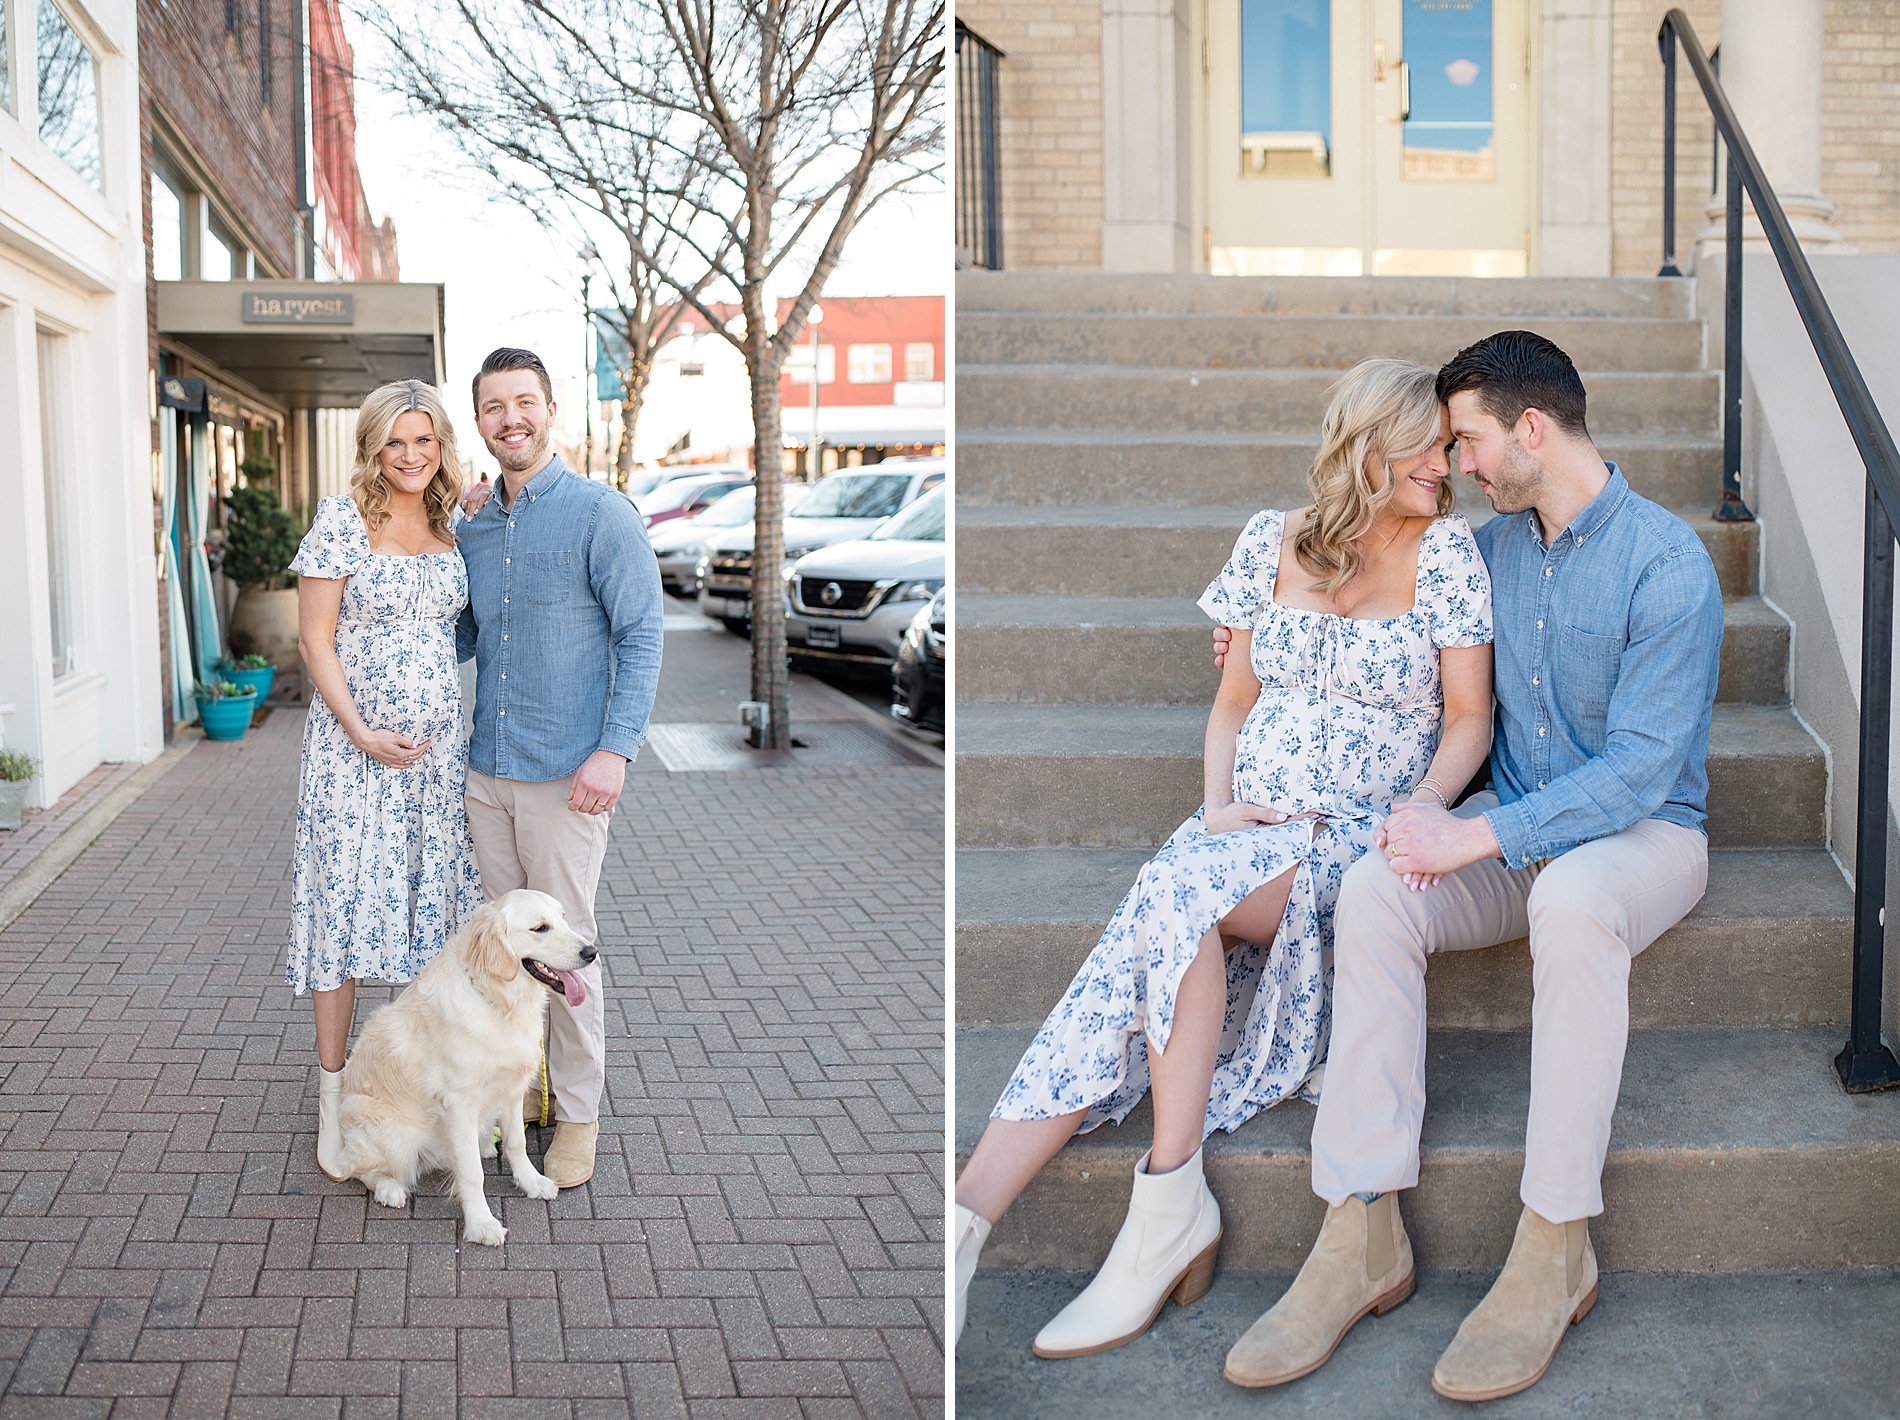 Top 11 Dallas-Fort Worth Picture Locations | portraits in downtown McKinney photographed by Lindsey Dutton Photography, a Dallas Family photographer
